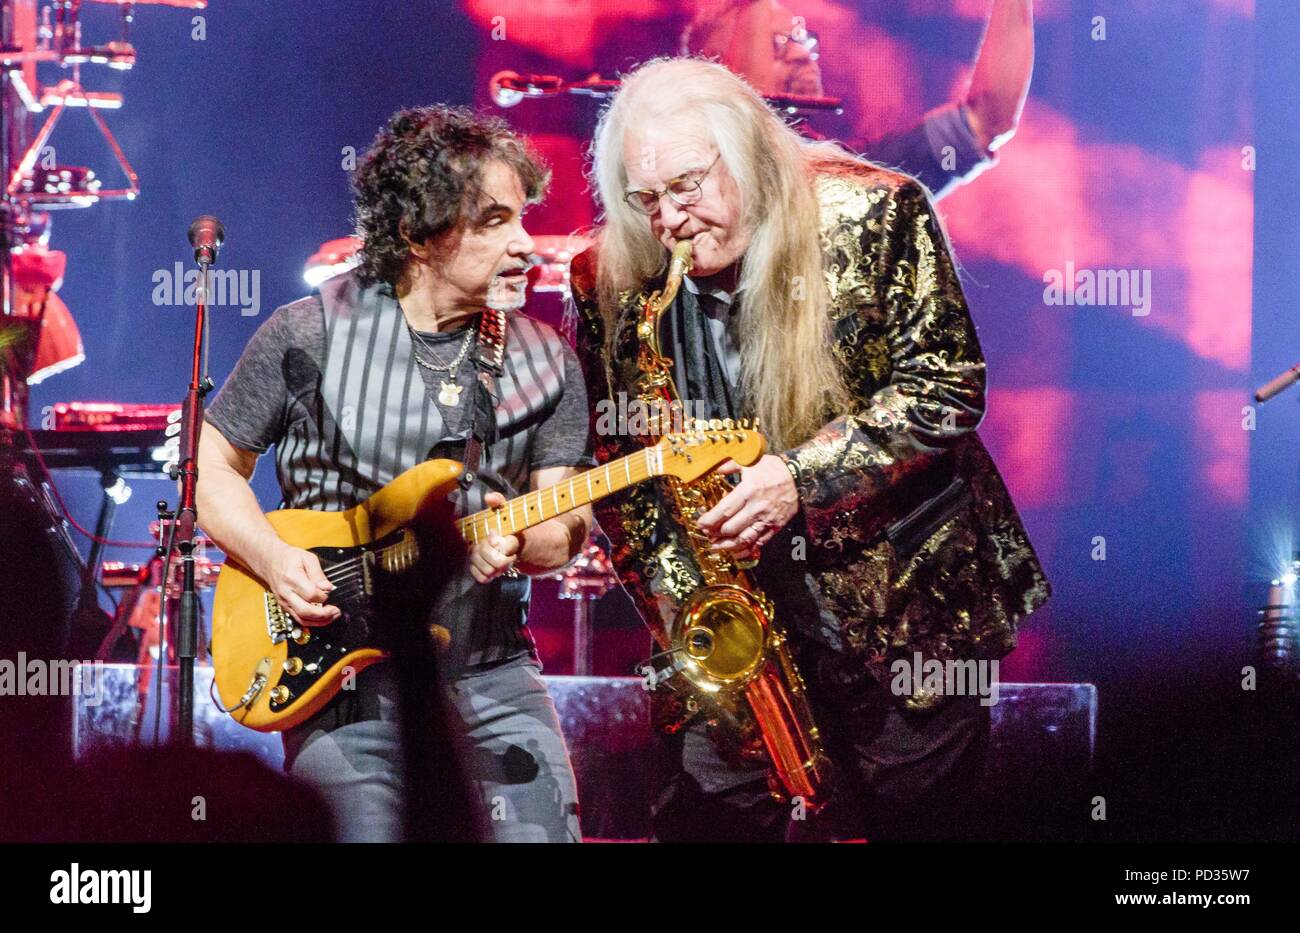 San Diego, California, USA. 4th Aug, 2018. JOHN OATES and CHARLIE DECHANT performing at the DARYL HALL and JOHN OATES show at Viejas Arena in San Diego, California on August 4, 2018 Credit: Marissa Carter/ZUMA Wire/Alamy Live News Stock Photo